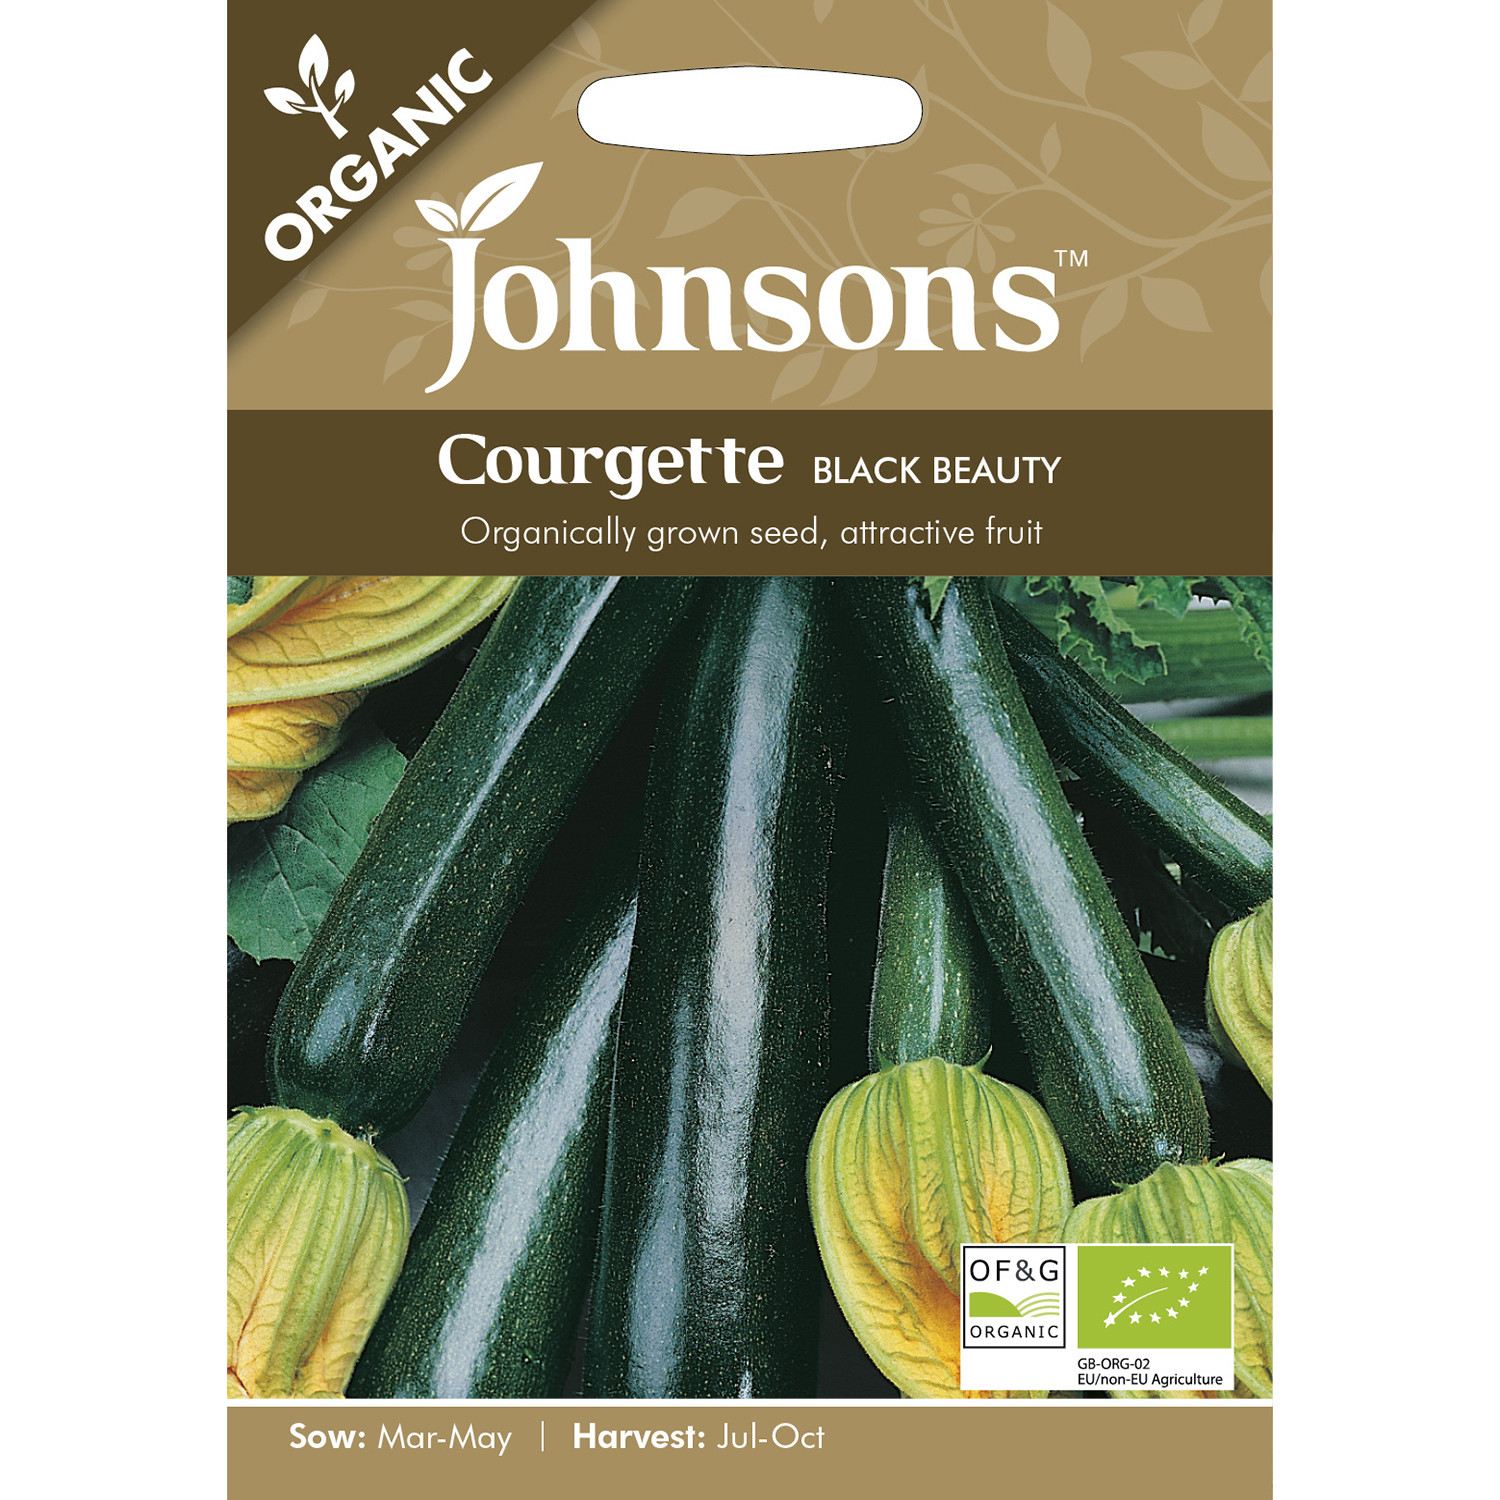 Johnsons Organic Black Beauty Courgette Seeds Image 2